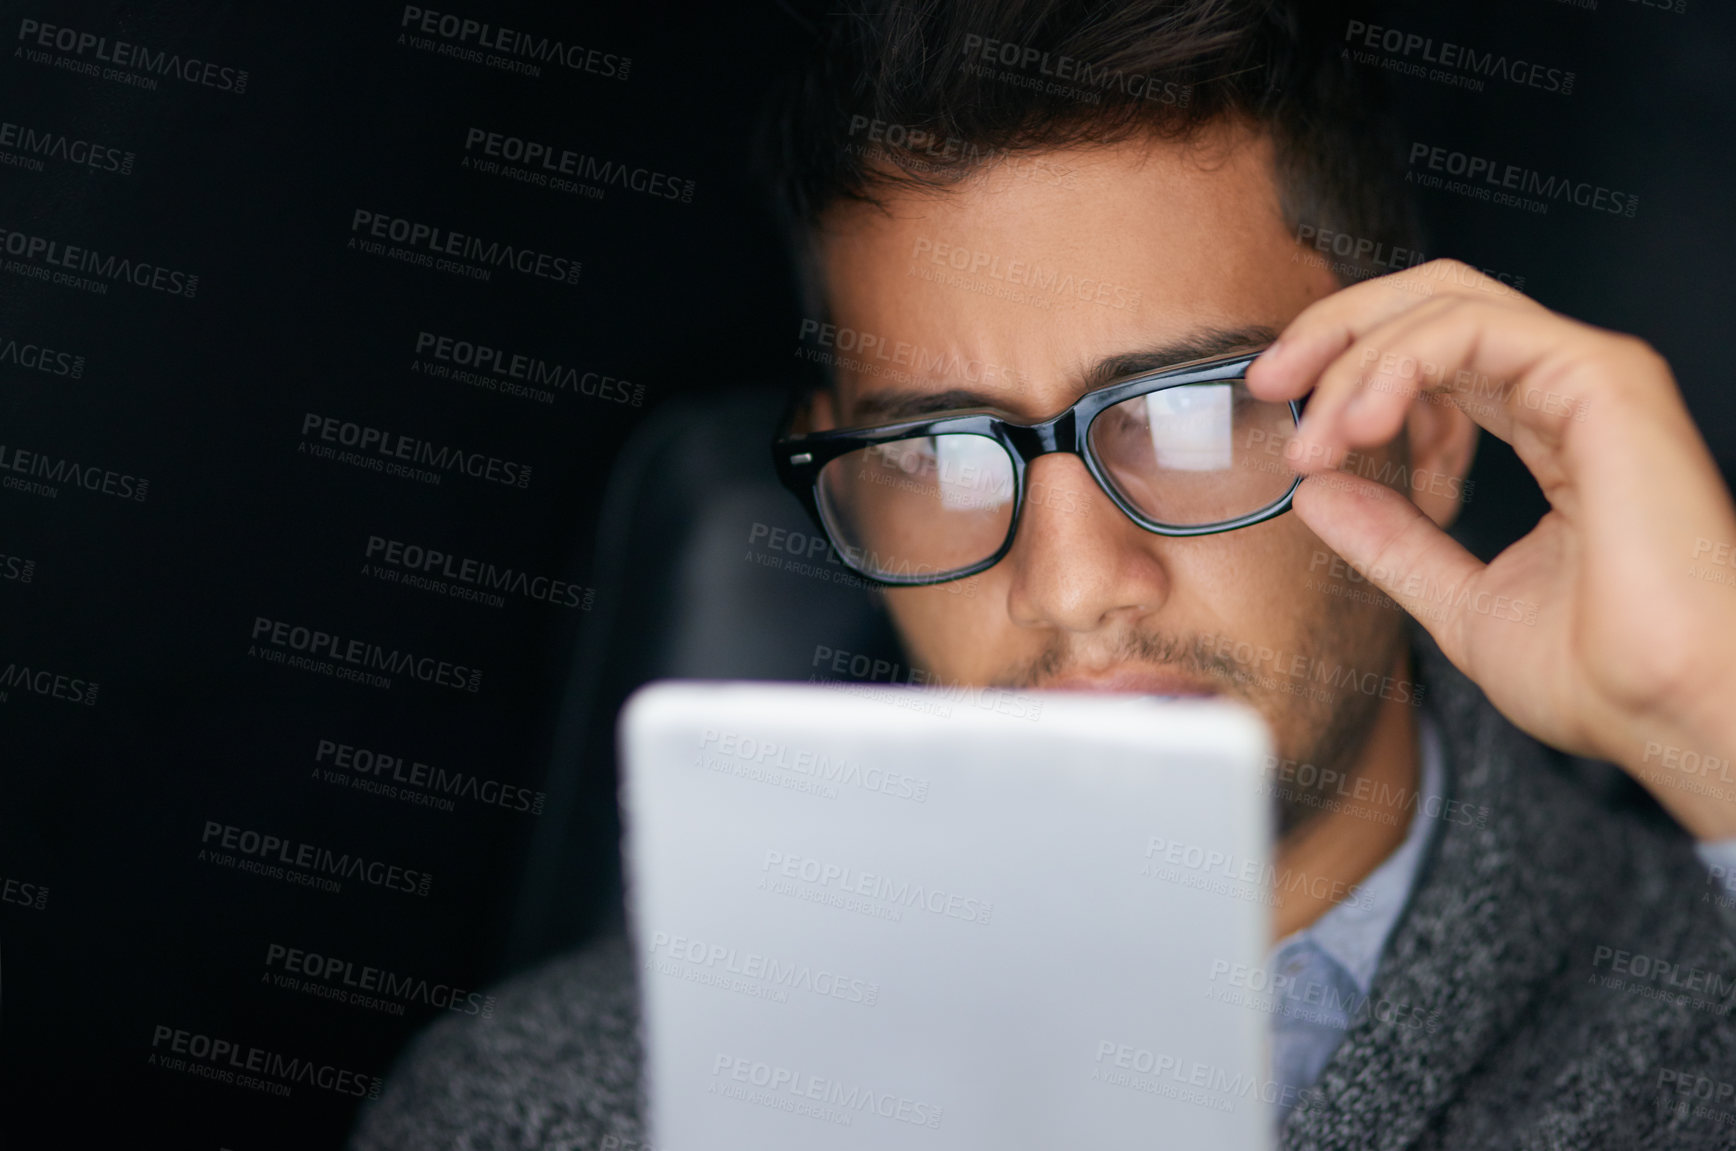 Buy stock photo Shot of a young man wearing glasses using a digital tablet in the dark